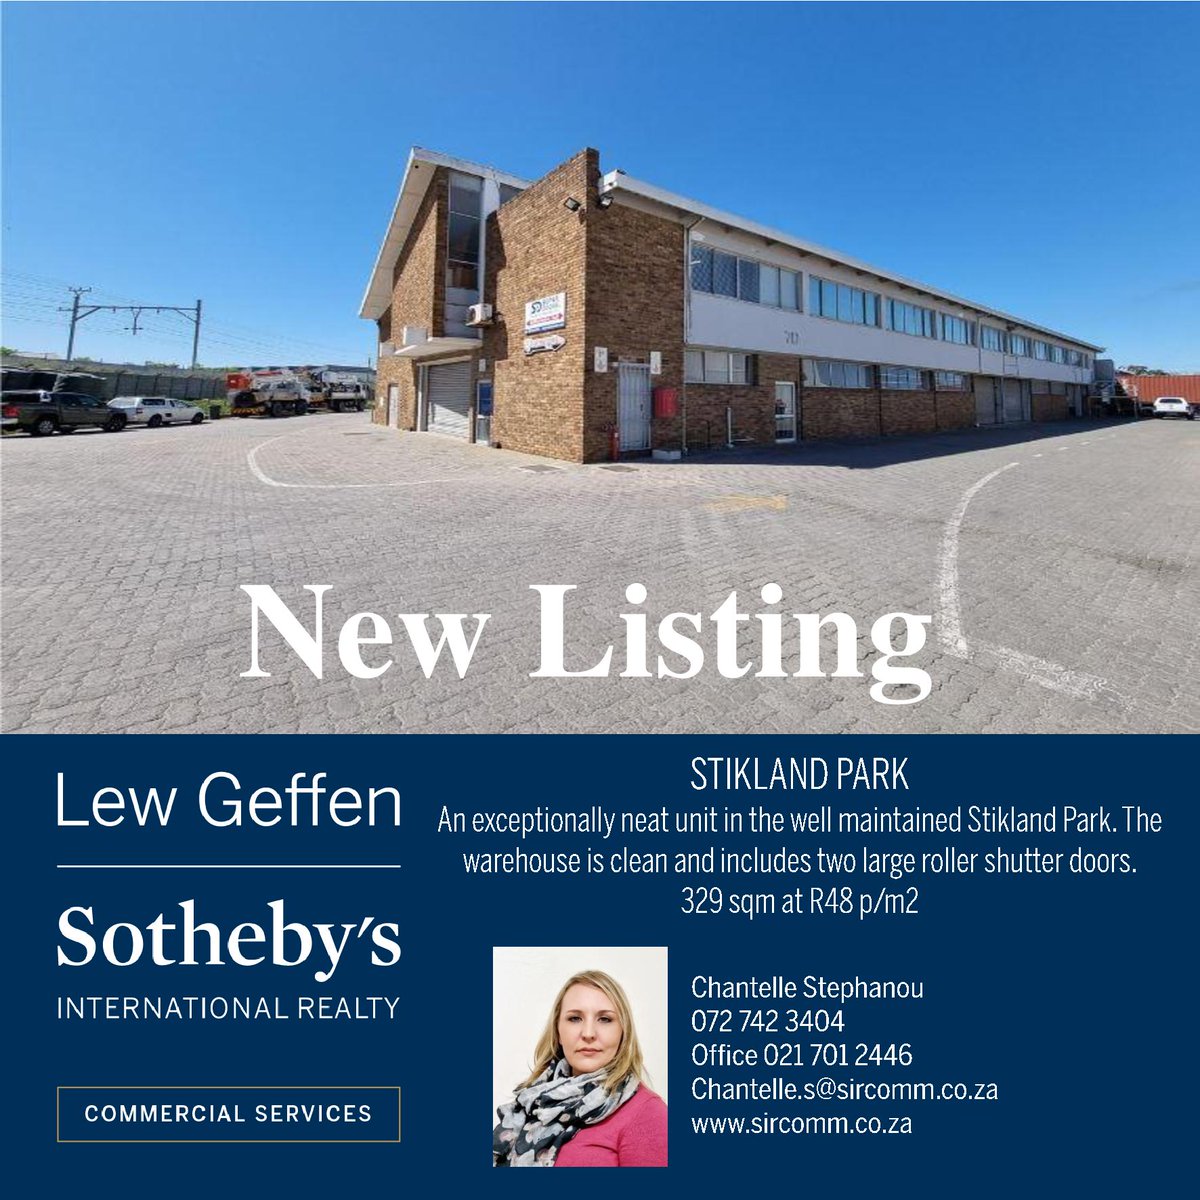 New Listing!!
Industrial Space To Let in Stikland Park
Contact Chantelle Stephanou to view today!

#newlisting #new #industrial #spacetolet #sircomm #sothebysrealty #sothebyscommercial